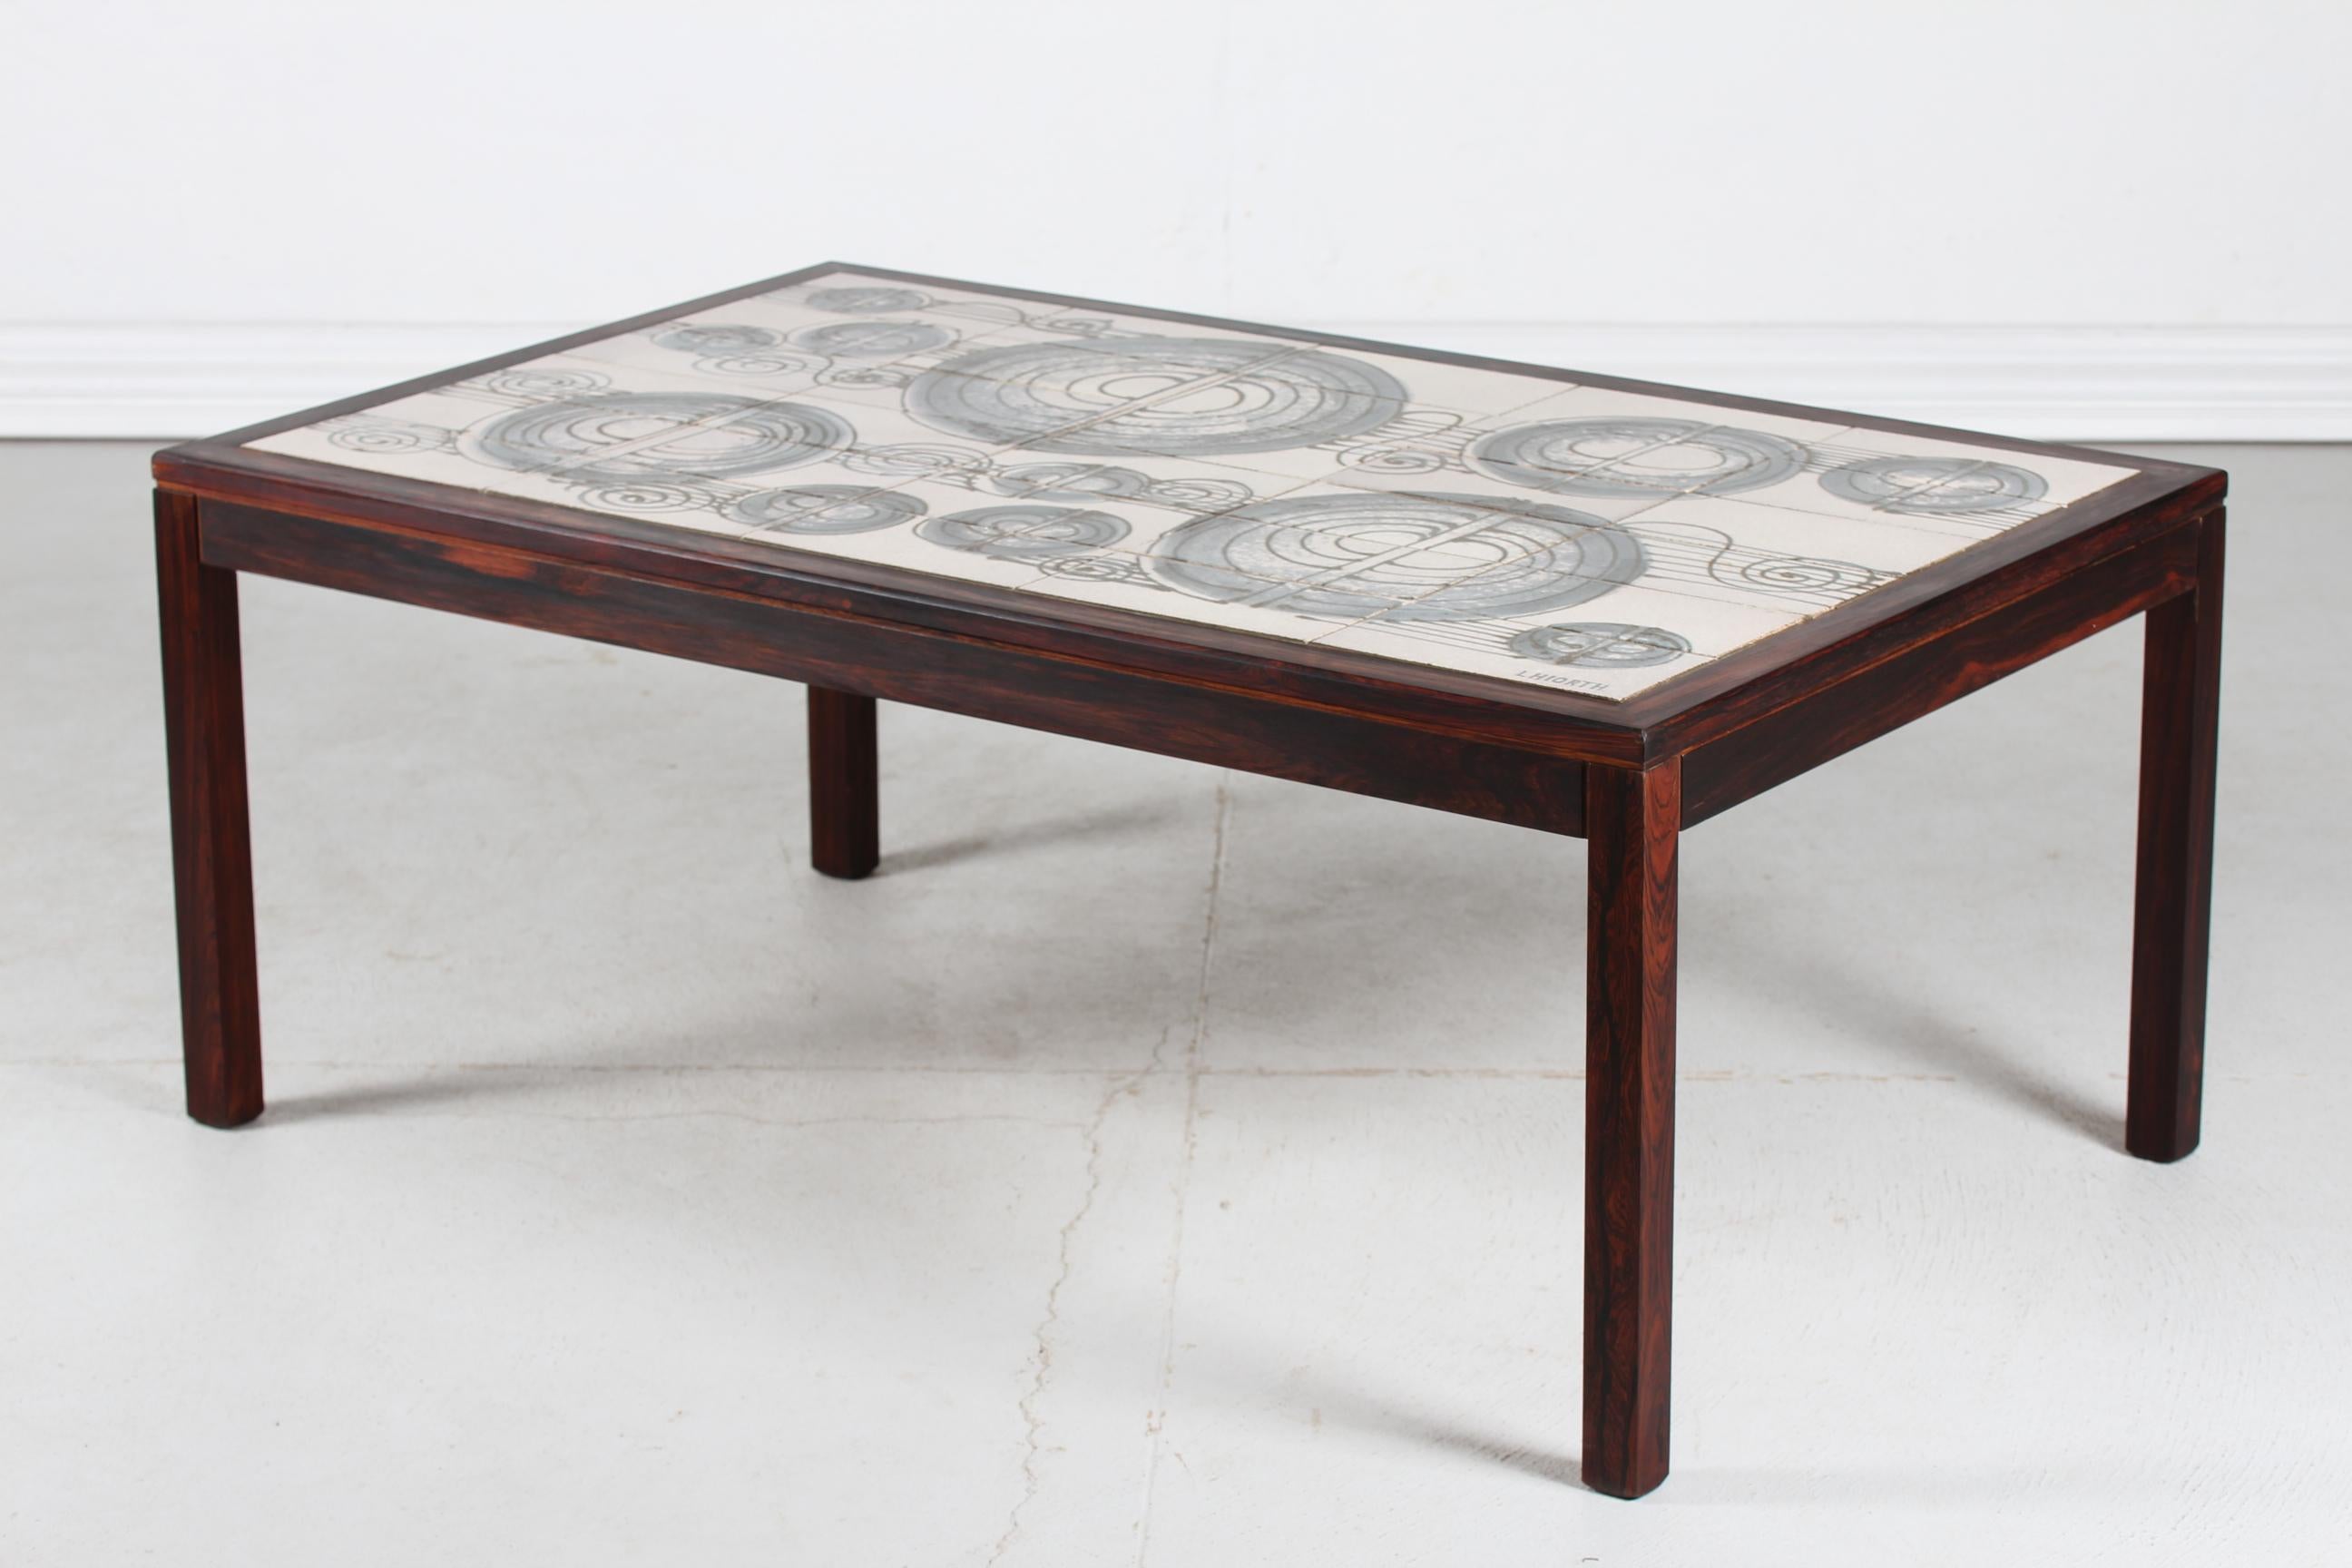 Danish Mid-century coffee table made from dark wood with inlaid ceramic tiles from the ceramic studio L. Hjorth. Made ca 1960s.
The tiles have a handpainted abstract decor in brown and blue on beige. 

One tile with signature: L Hjorth.



 